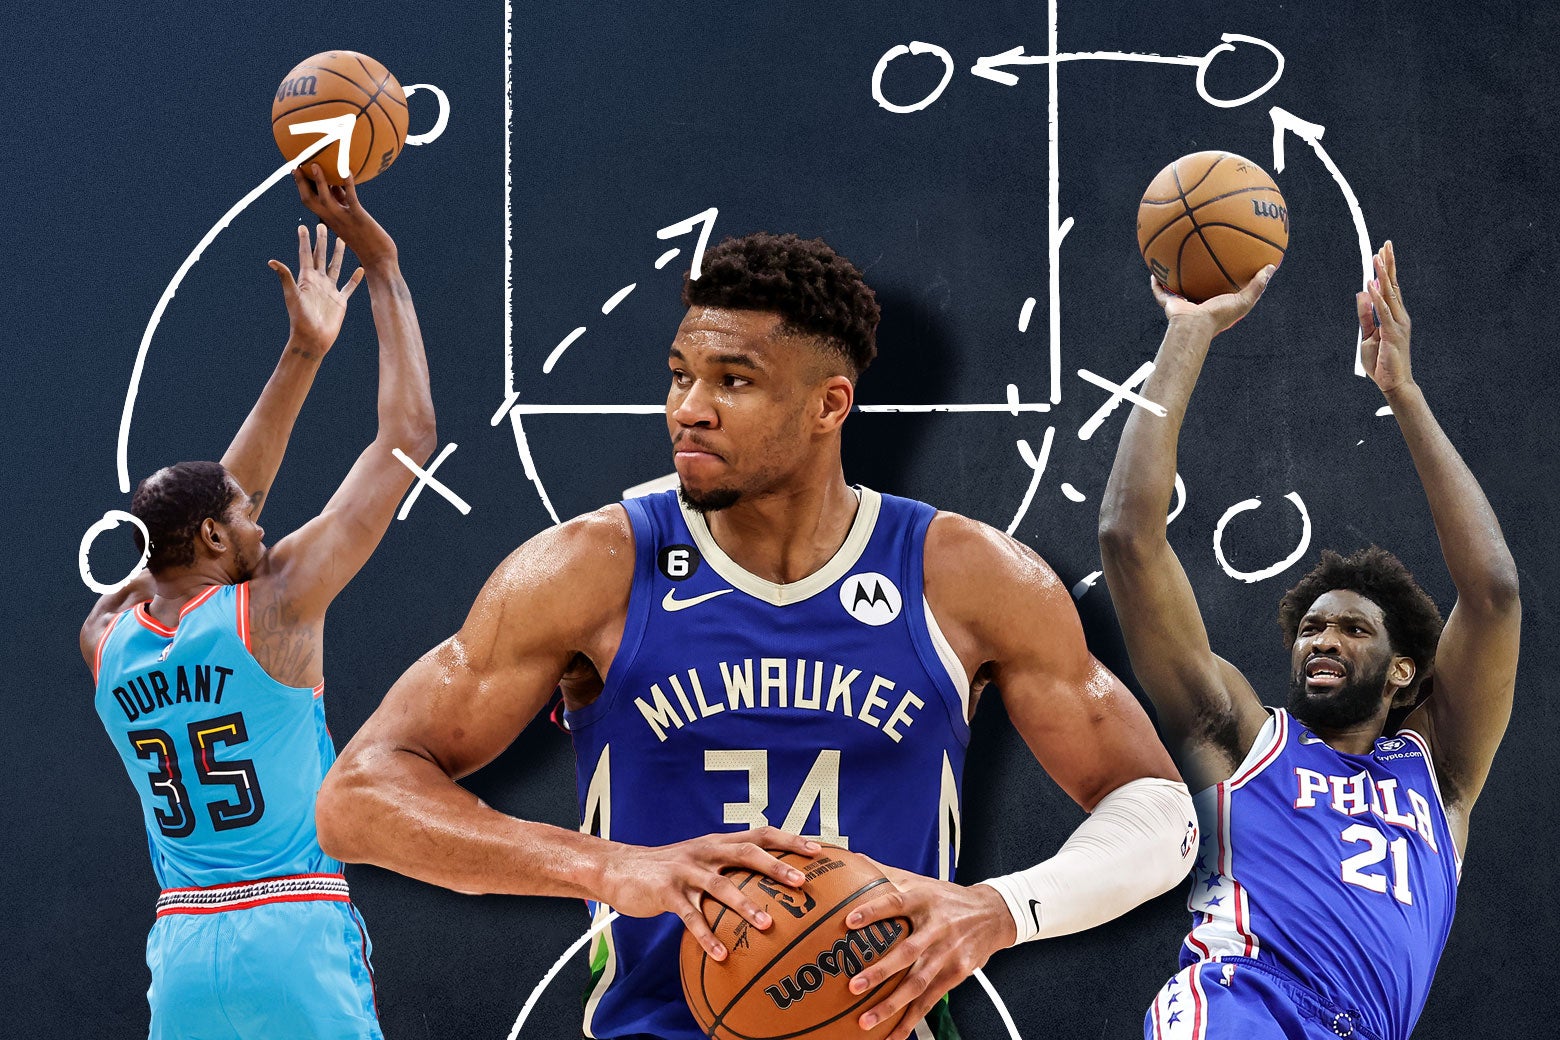 Left to write: Kevin Durant seen from behind shoots, Giannis Antetekounmpo grips a basketball and frowns, and Joel Embiid shoots while grimacing, in a collage over an illustration of Xes and Os and arrows over a basketball key, indicating a play.